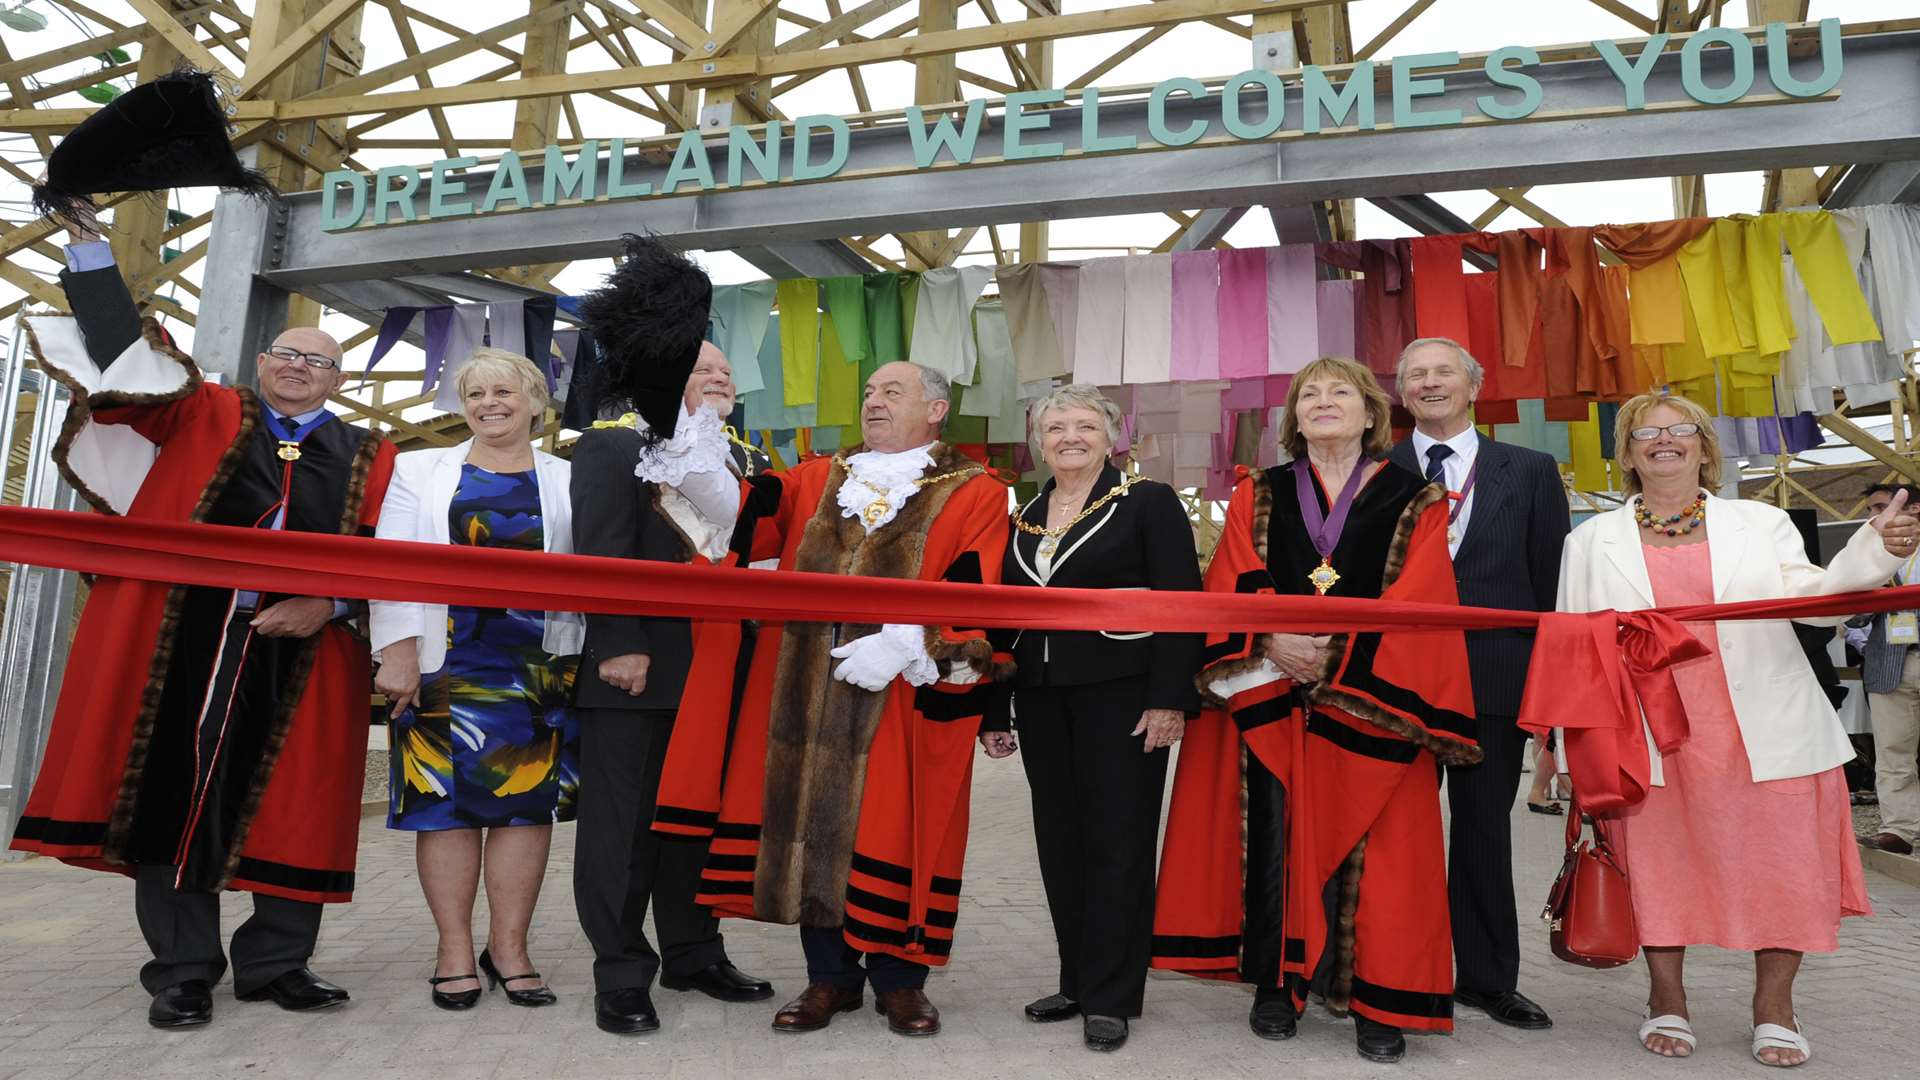 The grand opening of Dreamland